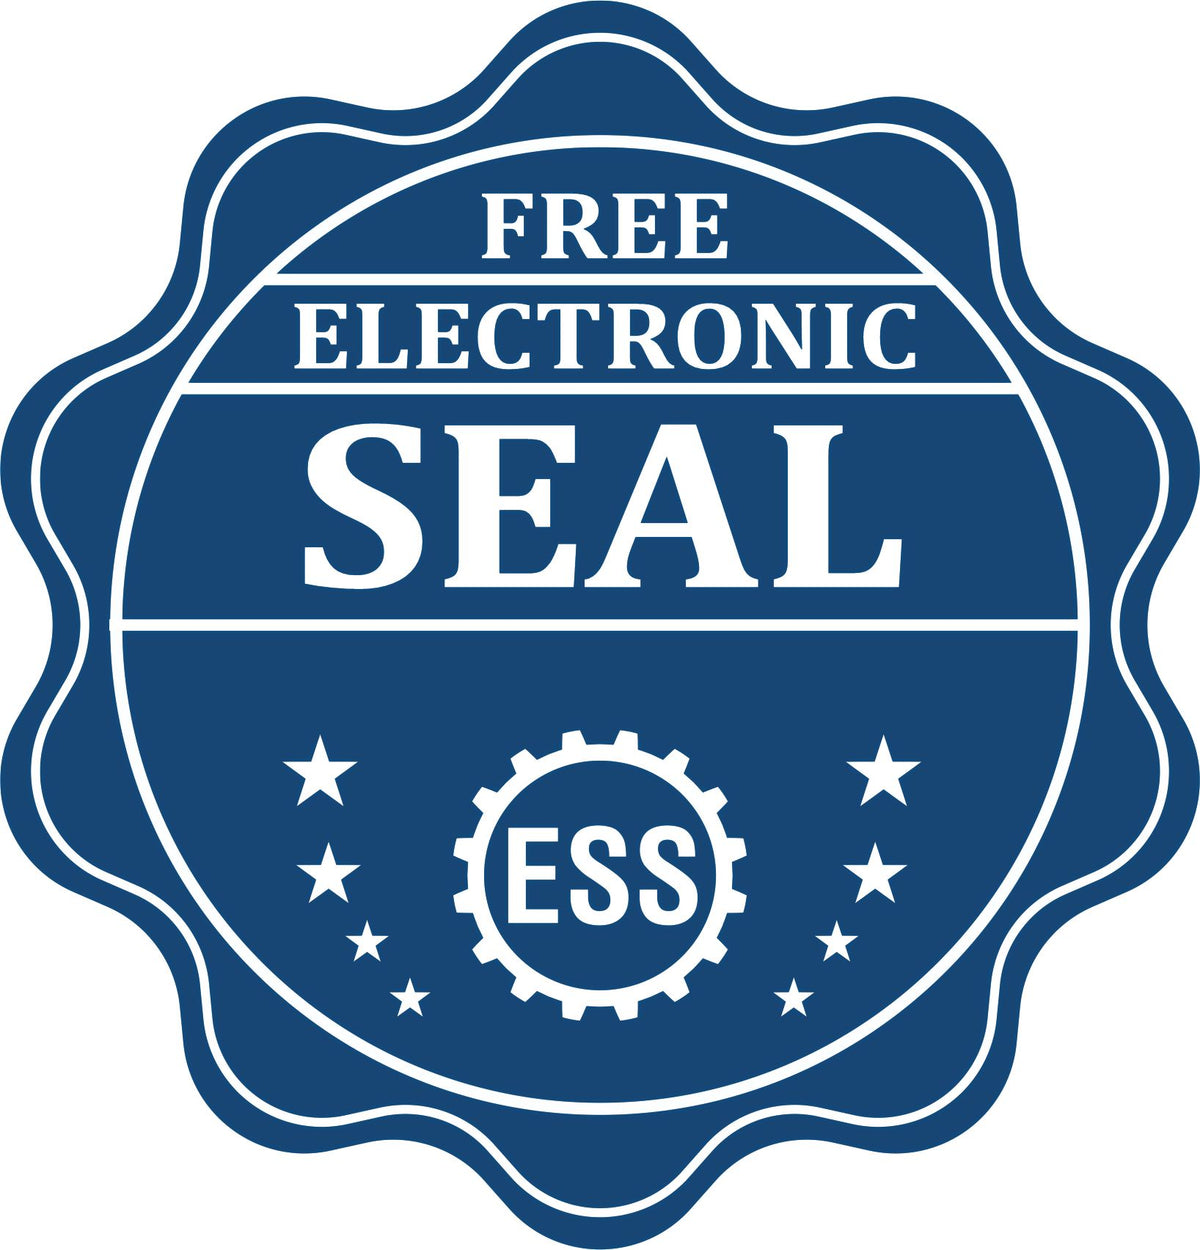 A badge showing a free electronic seal for the Heavy-Duty New Hampshire Rectangular Notary Stamp with stars and the ESS gear on the emblem.